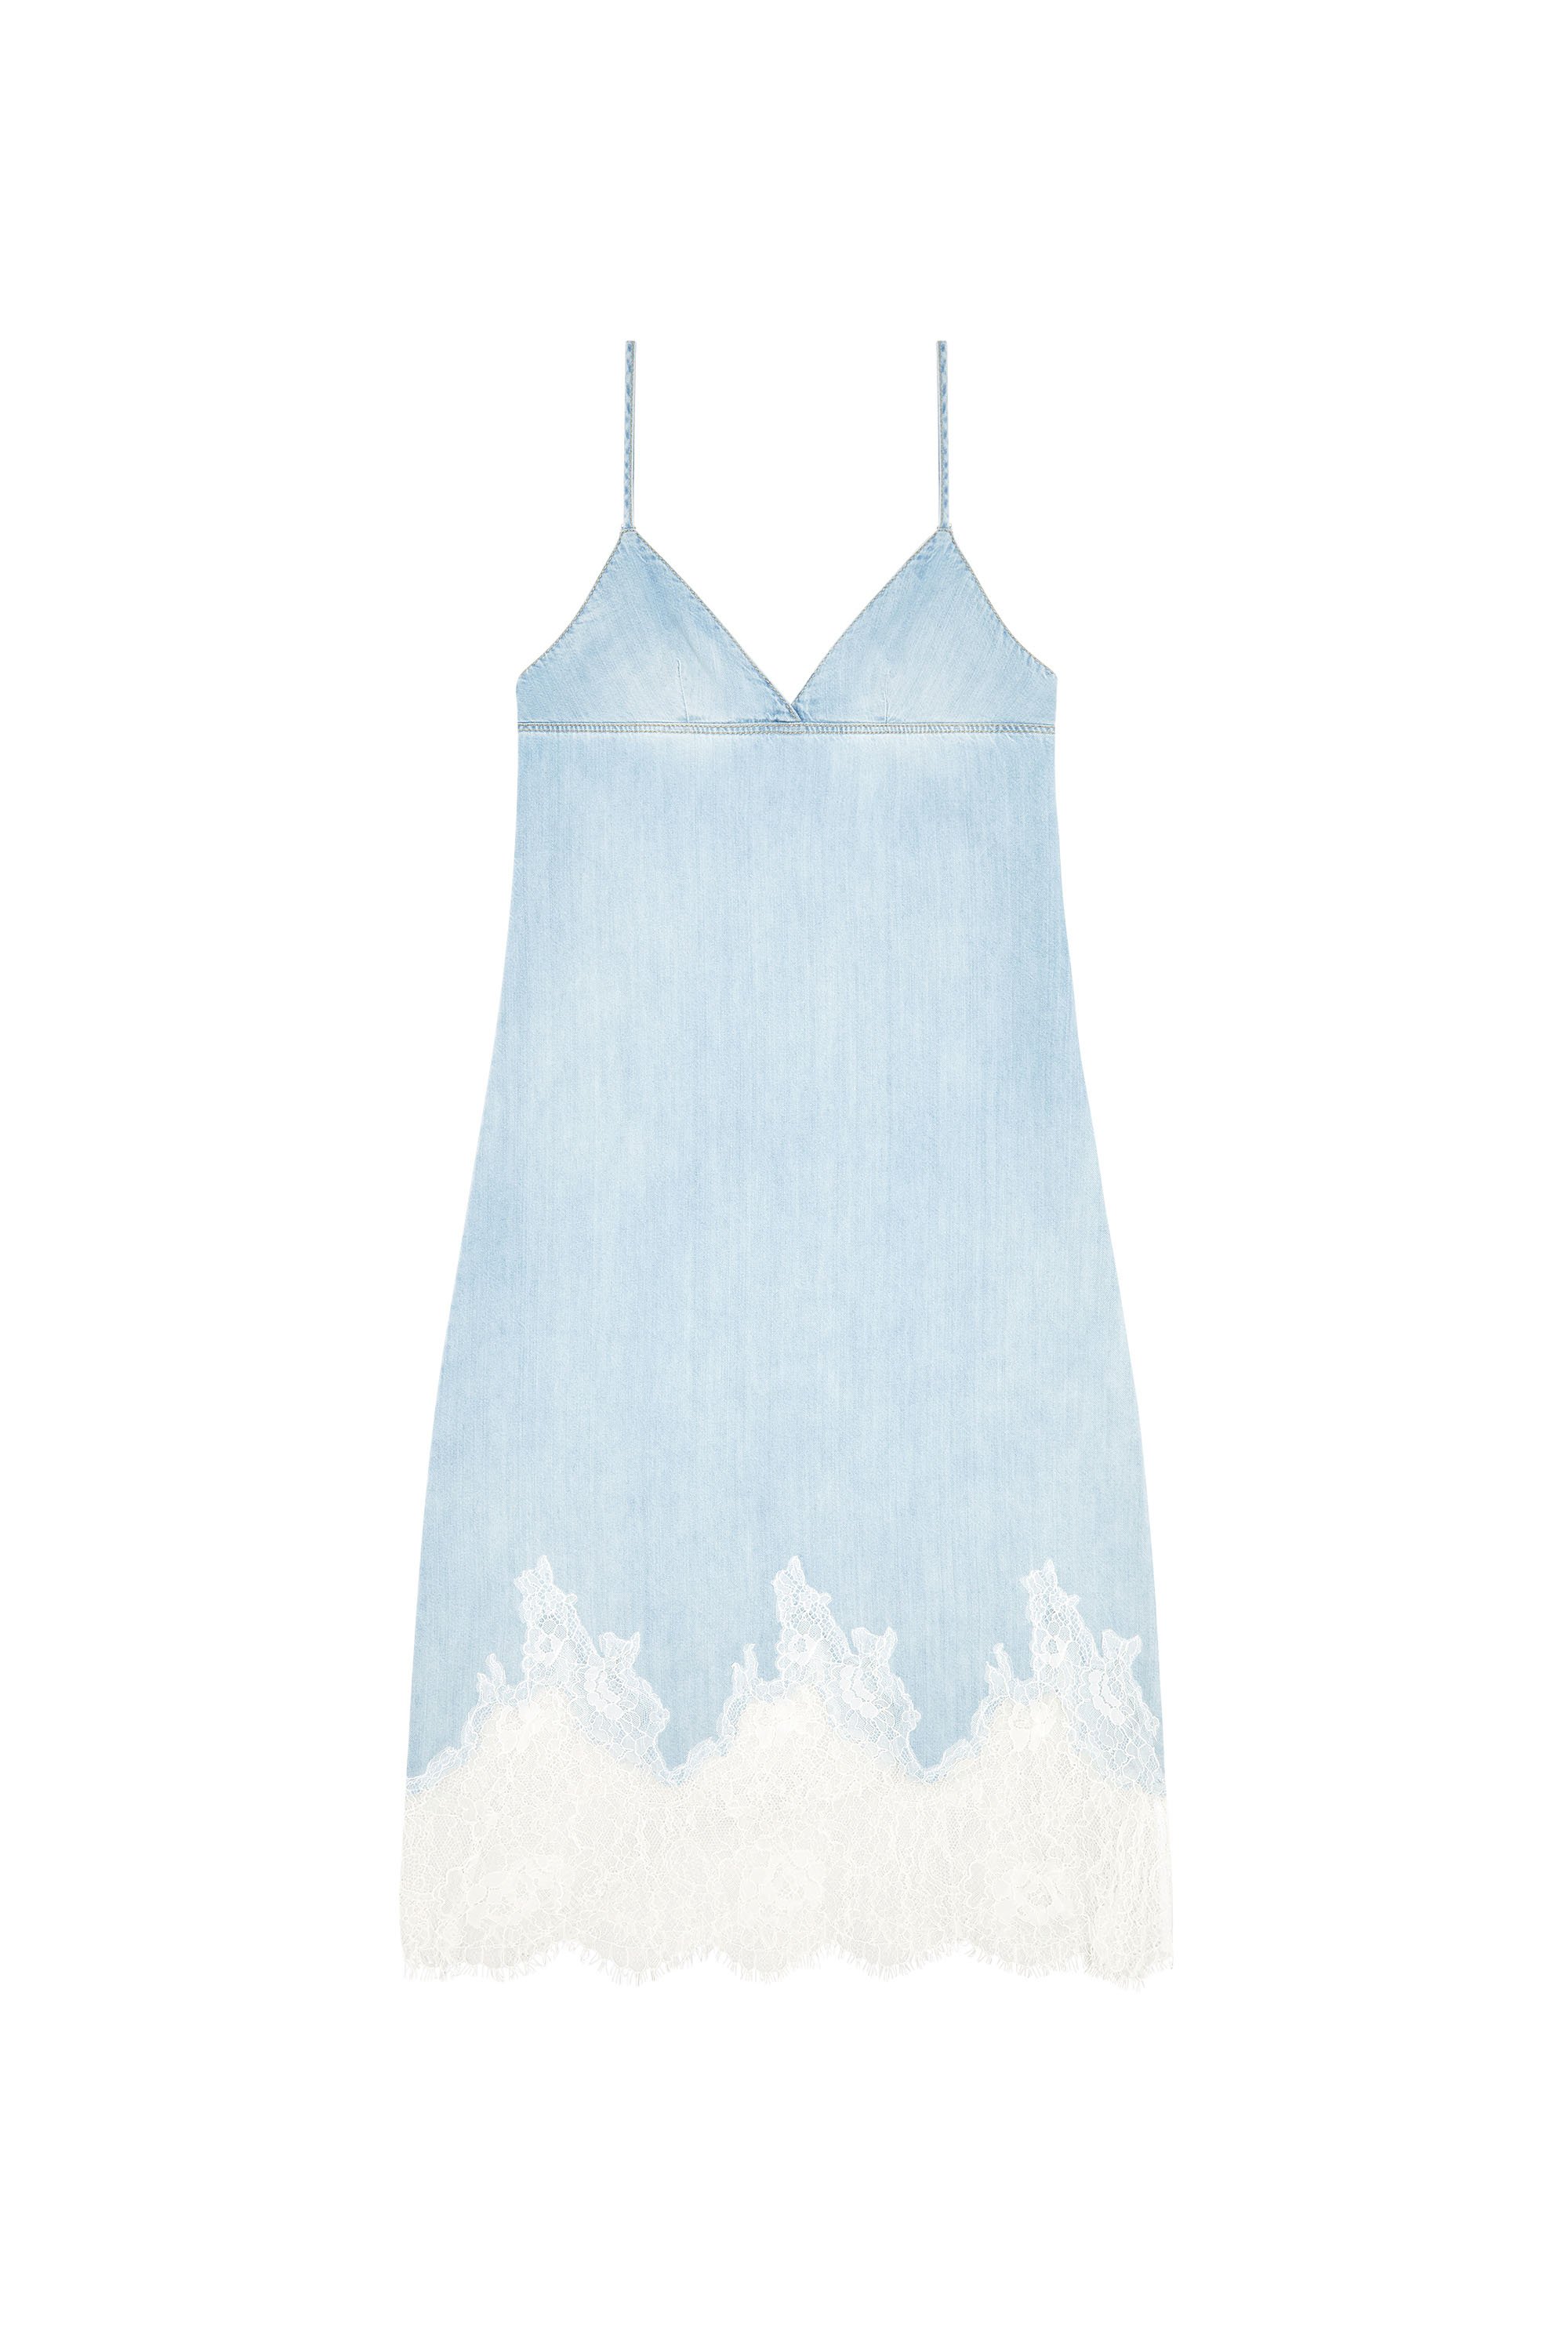 Diesel - DE-RUDE-S, Woman Strappy dress in denim and lace in Blue - Image 4